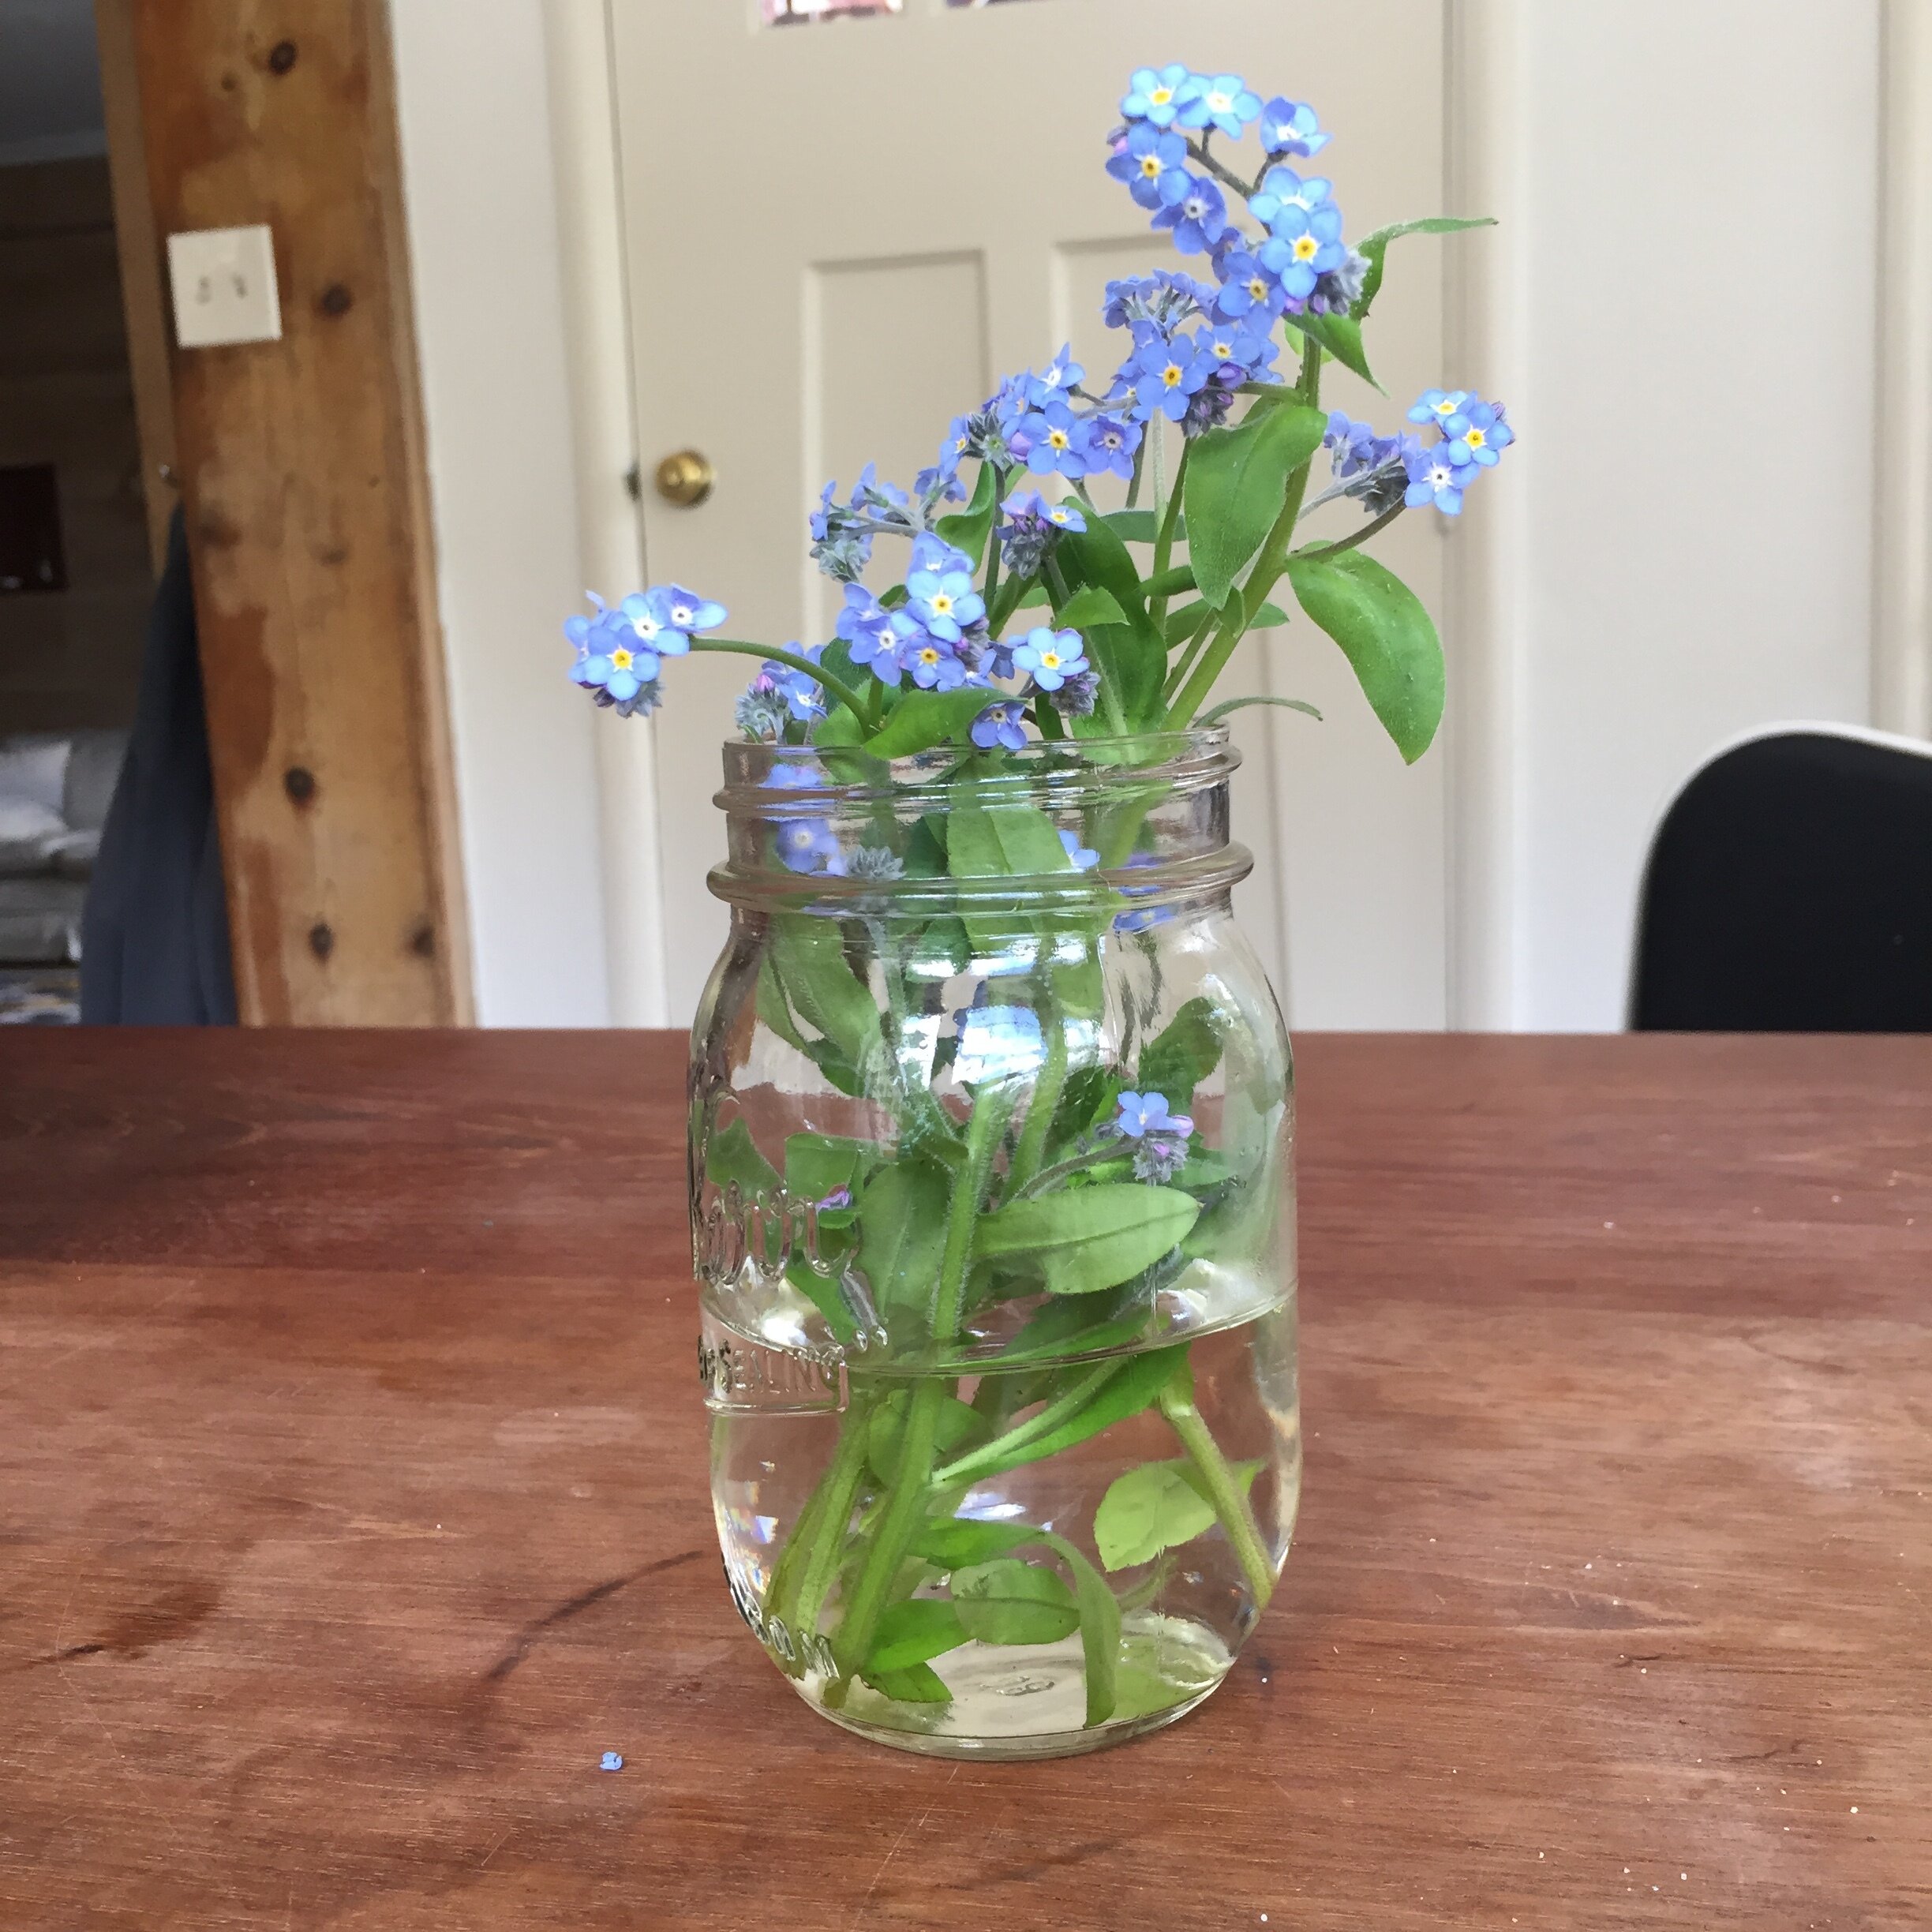  Alice Shaw, “Stuck in the house picture #8” - Forget-Me-Not flowers are not indigenous to Northern California and many people think they should be eliminated from the forest. I am doing my part by picking them. They might be invasive but they are st